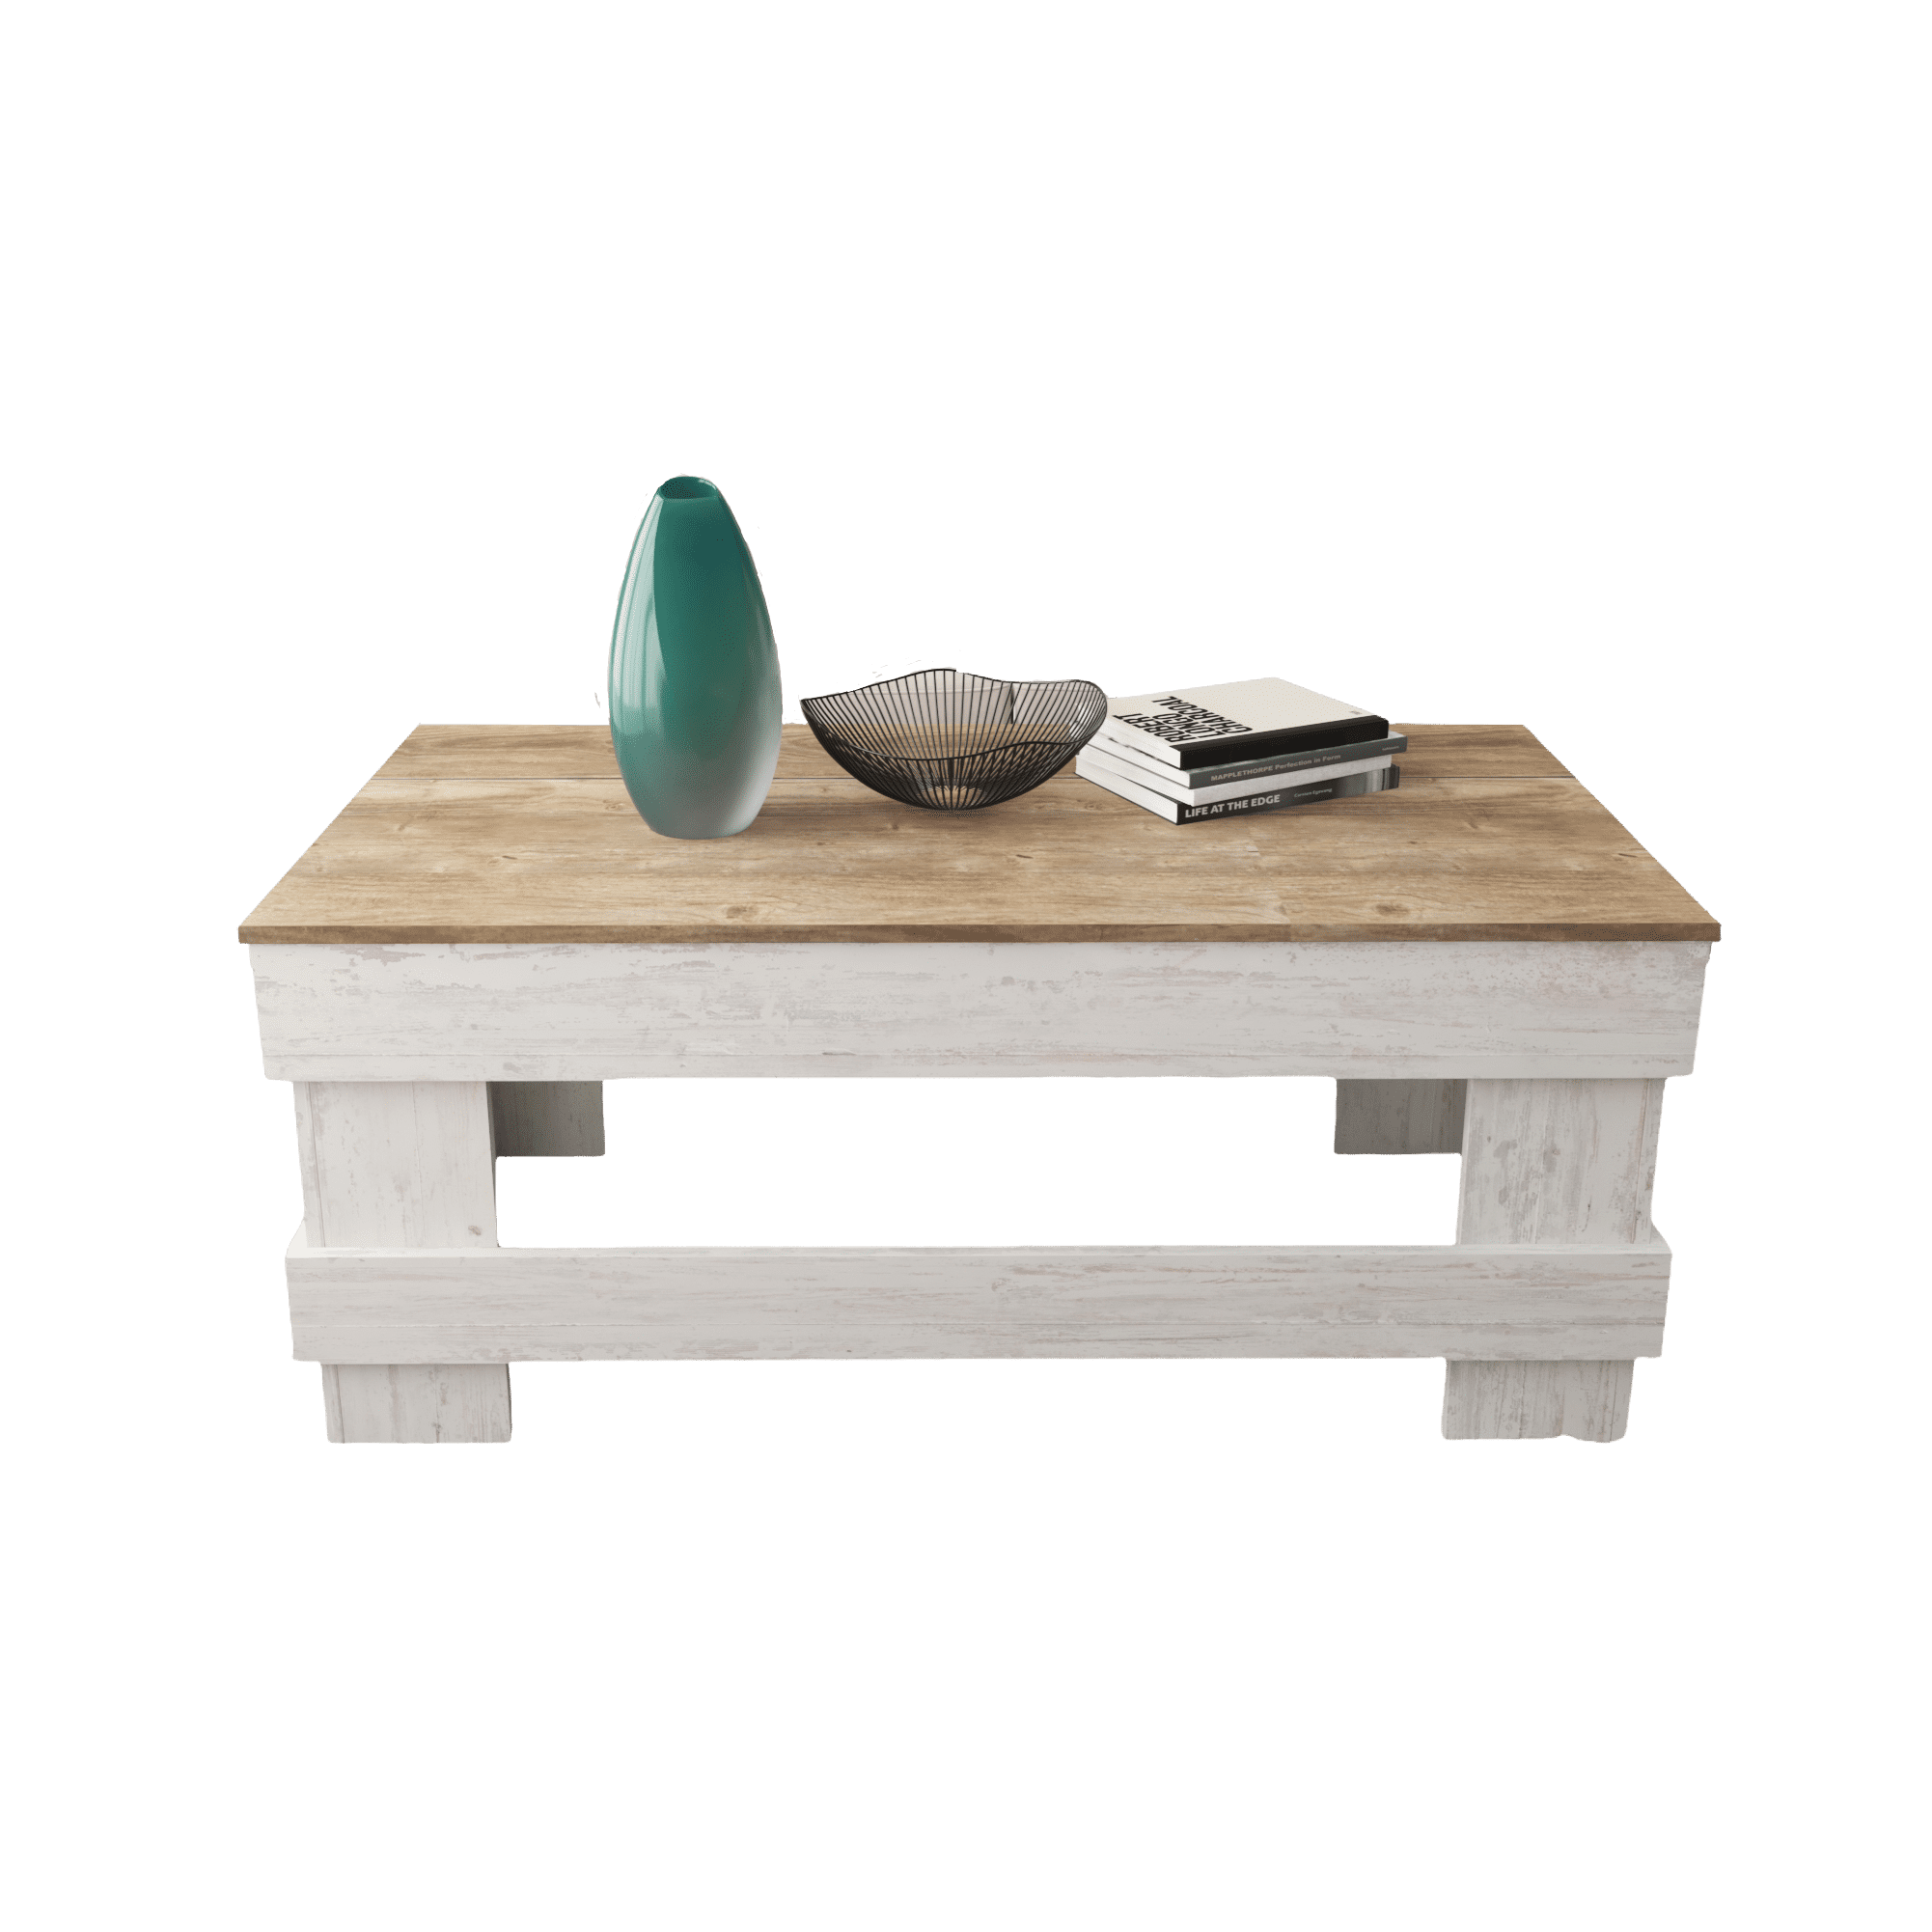 Woven Paths Reclaimed Wood Coffee Table, Natural/white – Walmart For Woven Paths Coffee Tables (Photo 1 of 15)